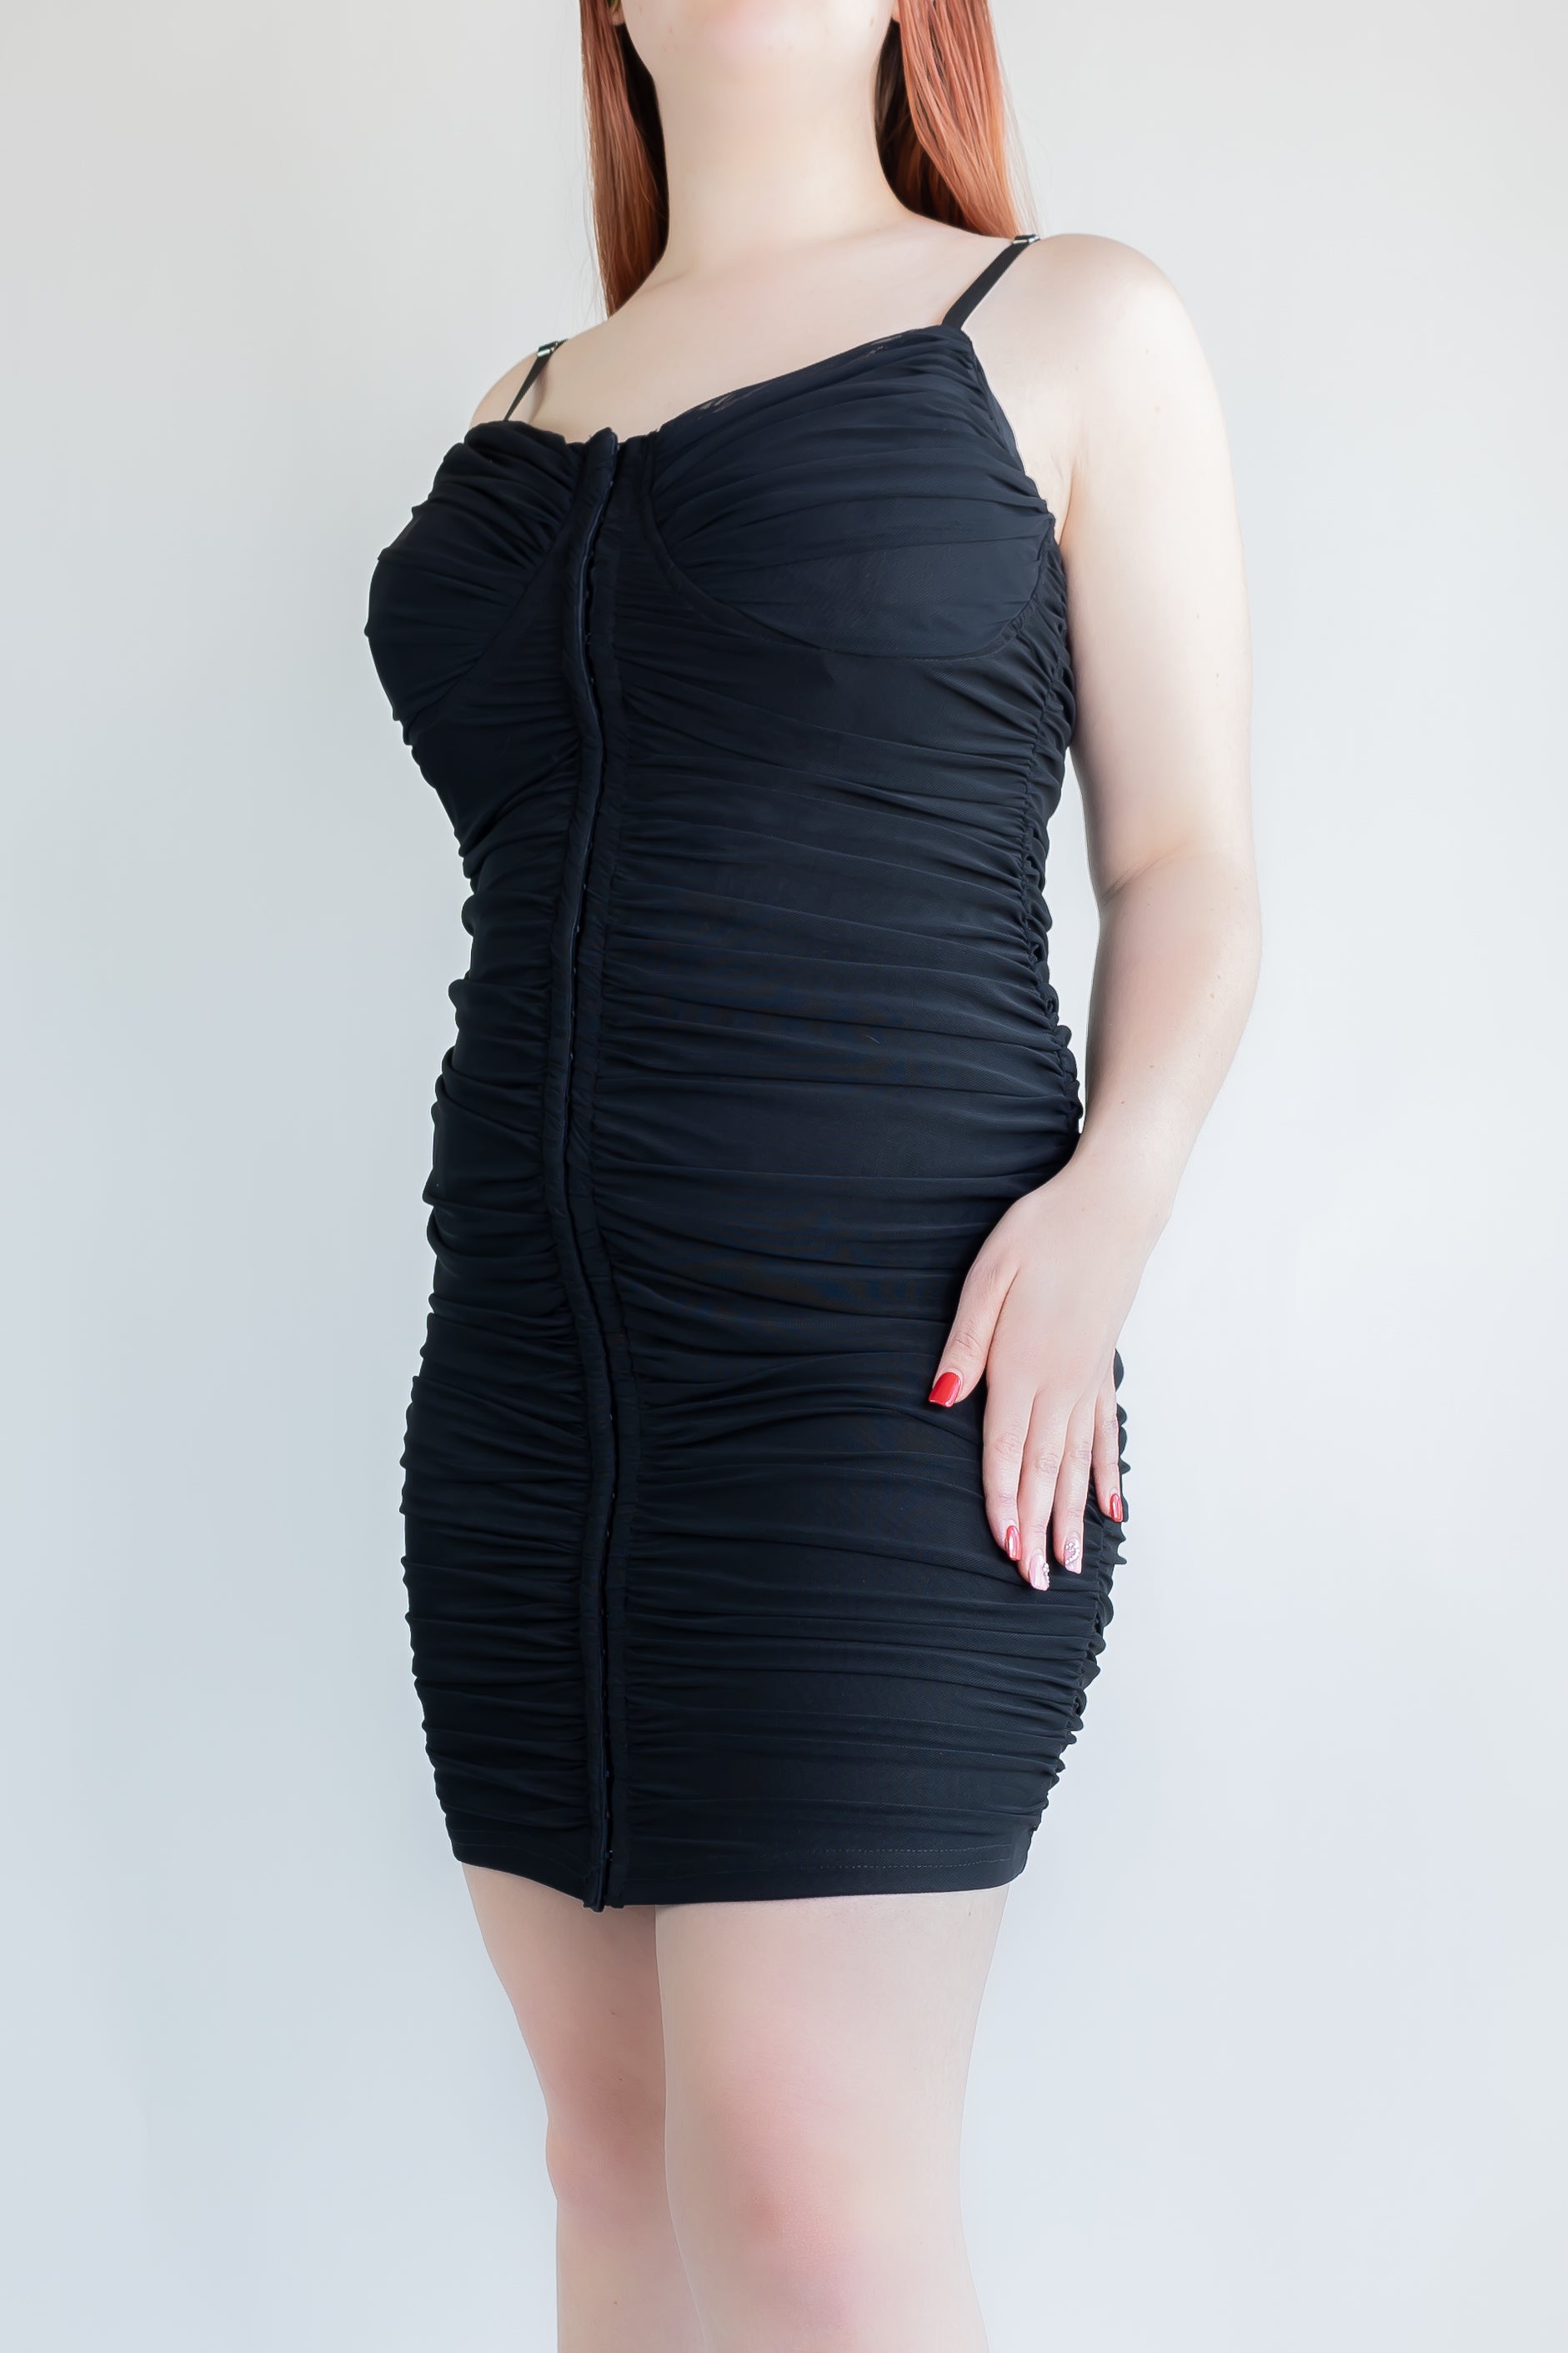 Women's plus size mini dress for cocktails and parties